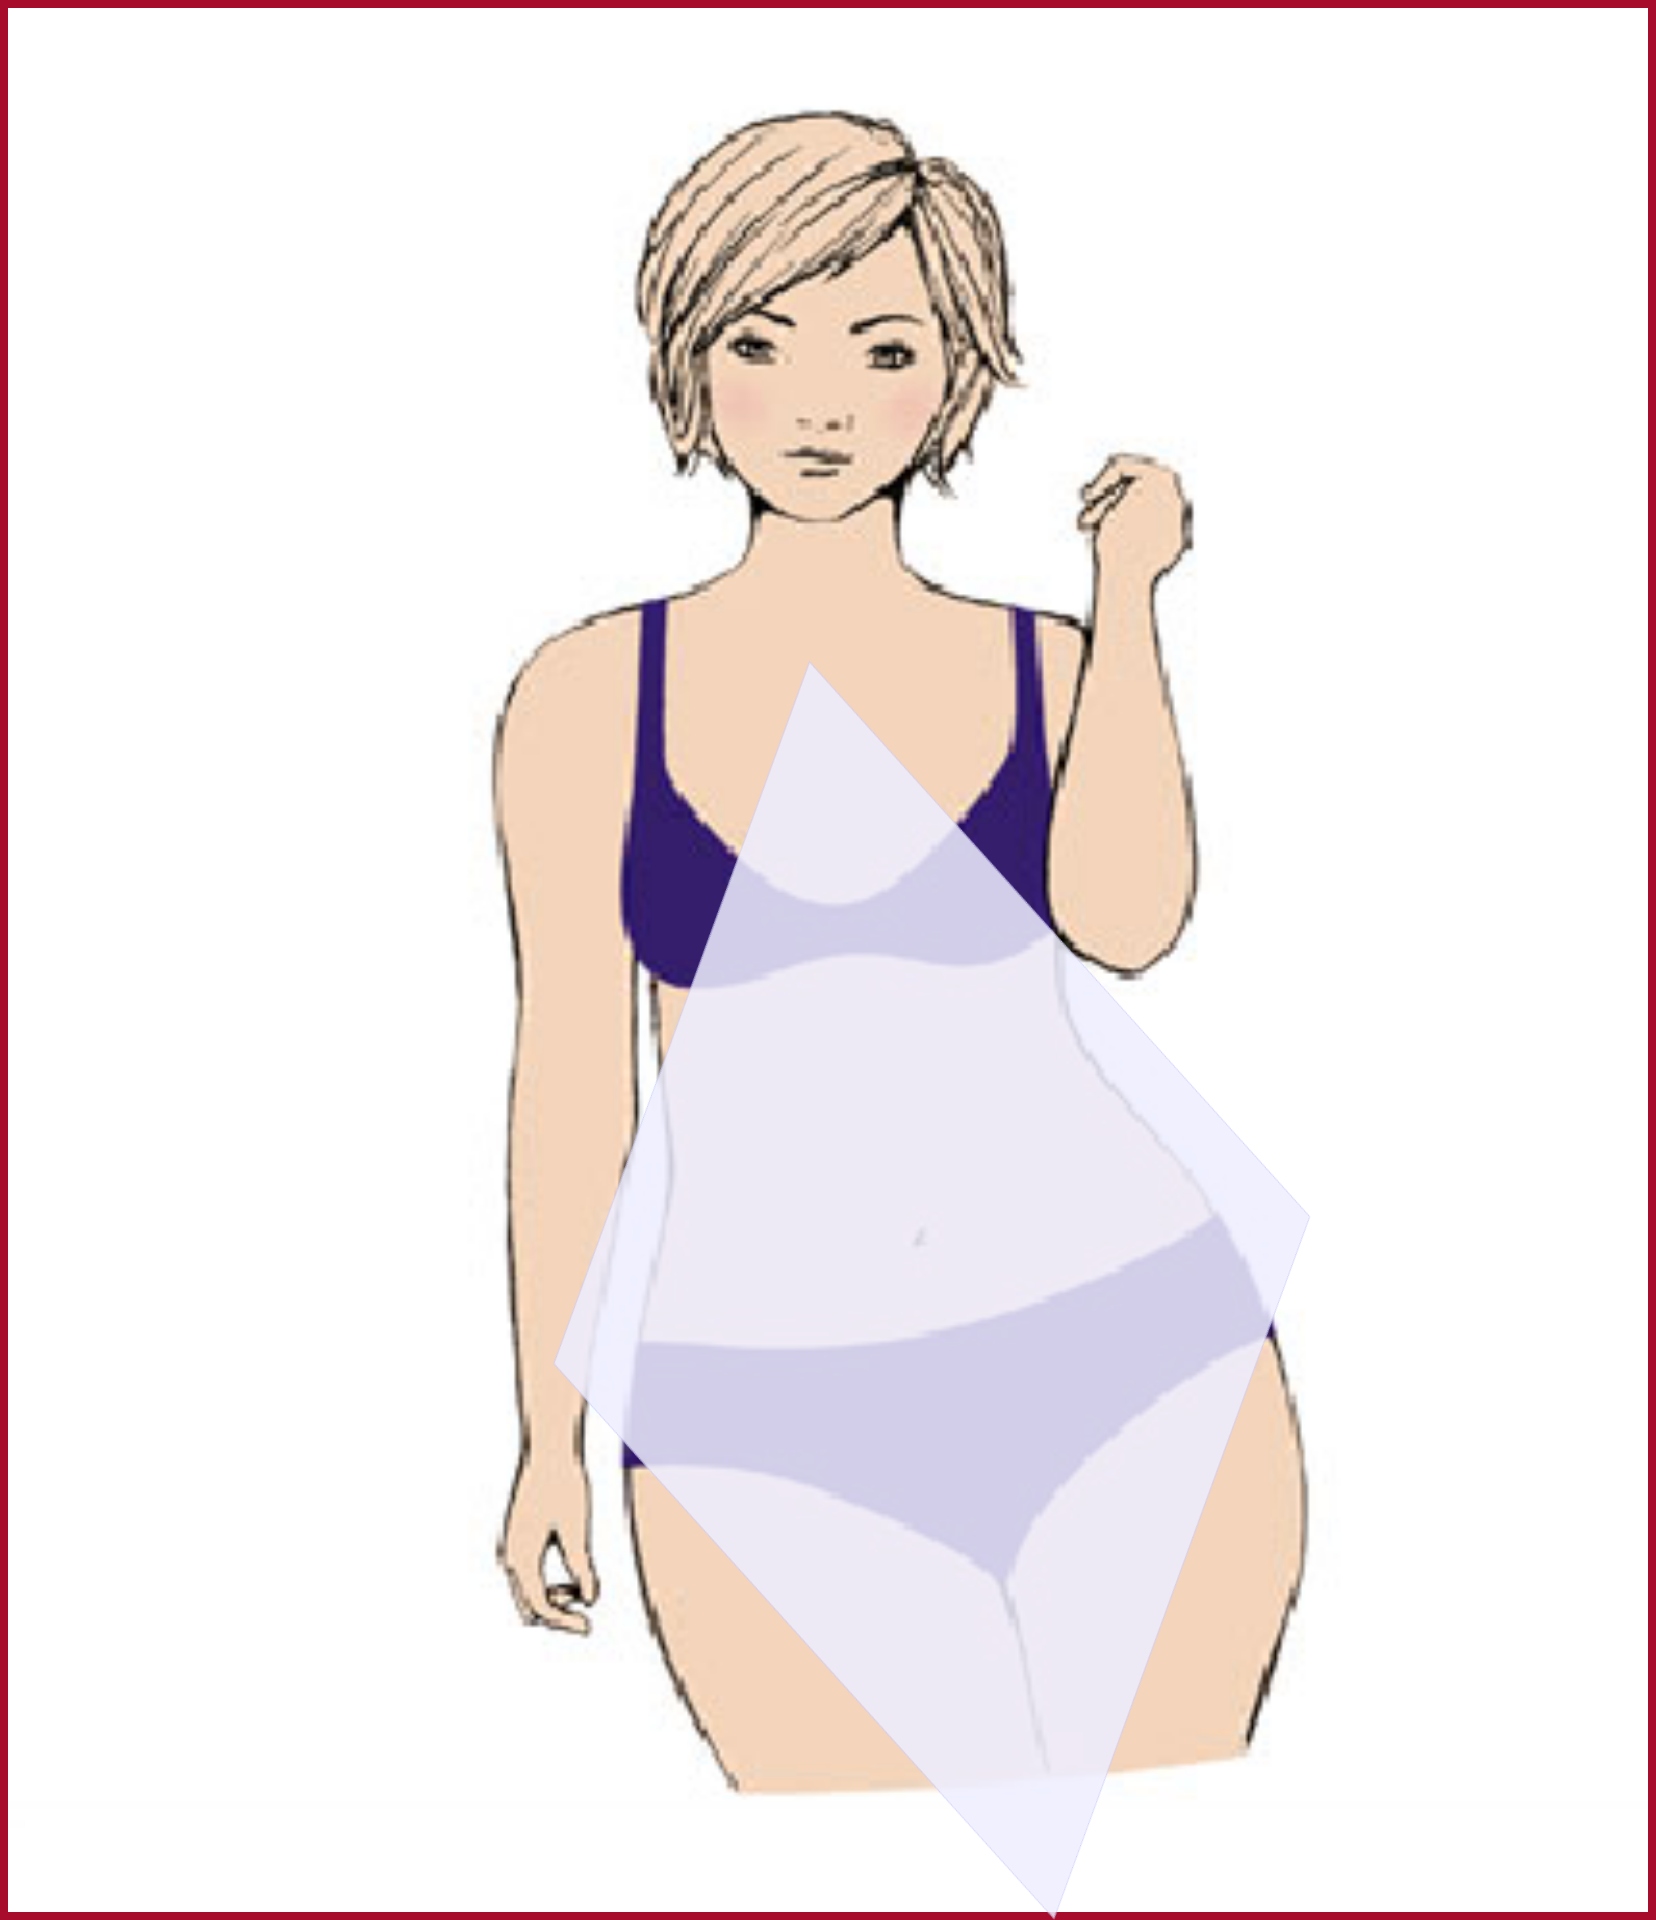 12 Women's Body Shapes - What Type Is Yours?  Body shapes women, Body types  women, Apple body shapes